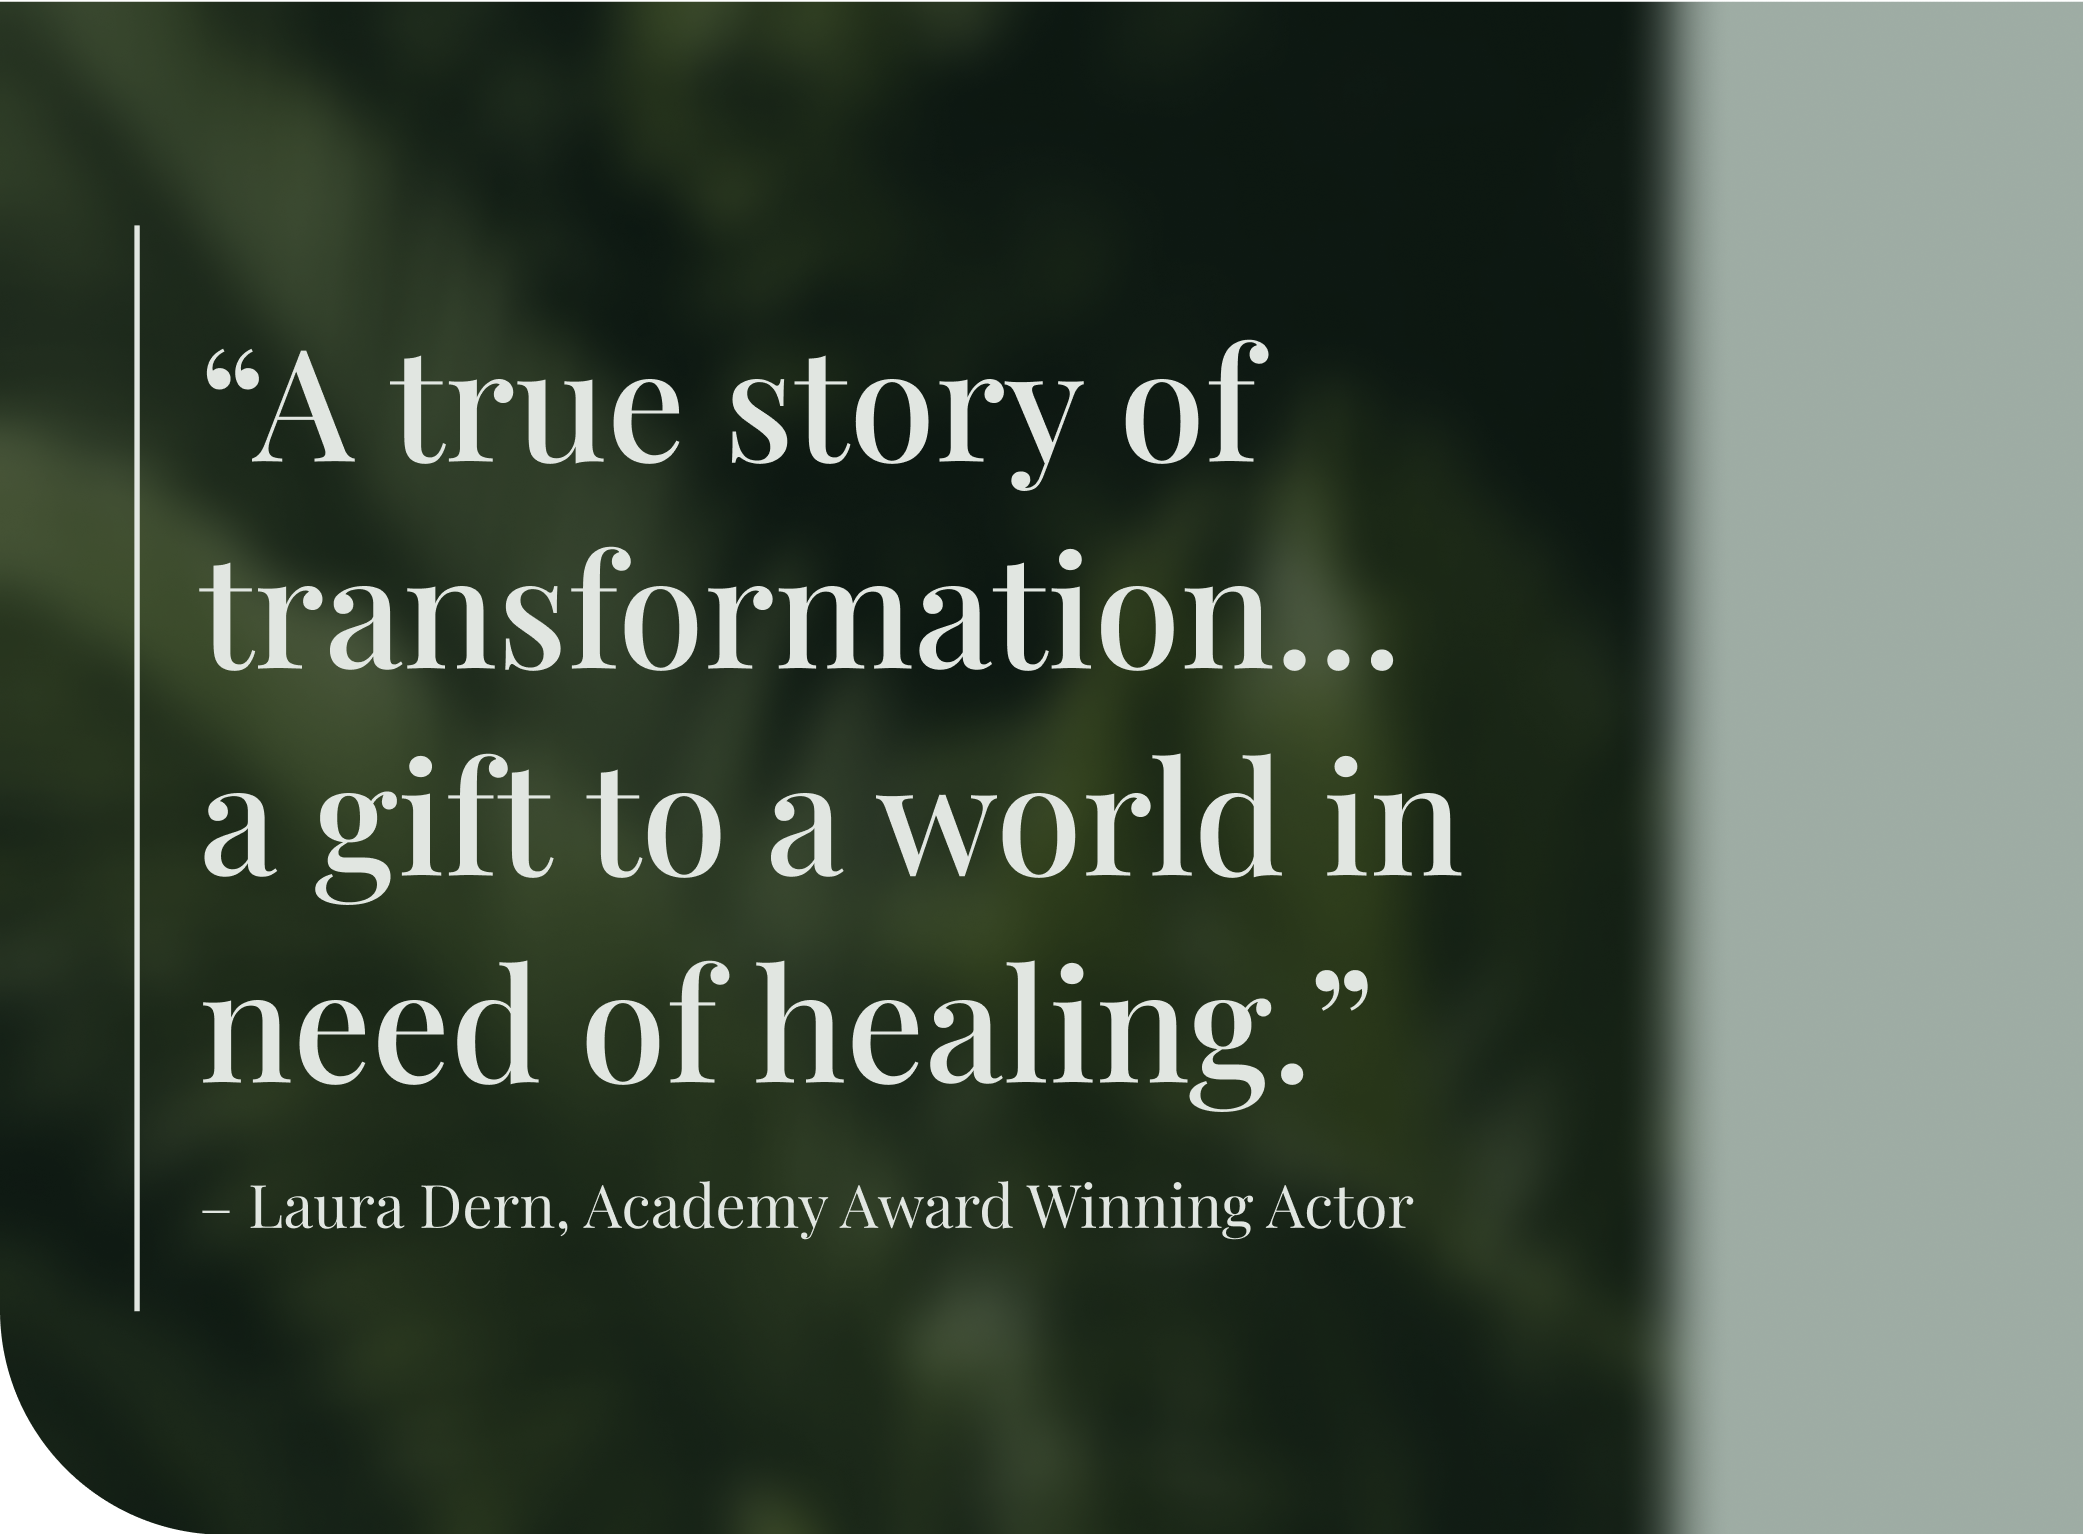 Inspirational quote about transformation and healing.